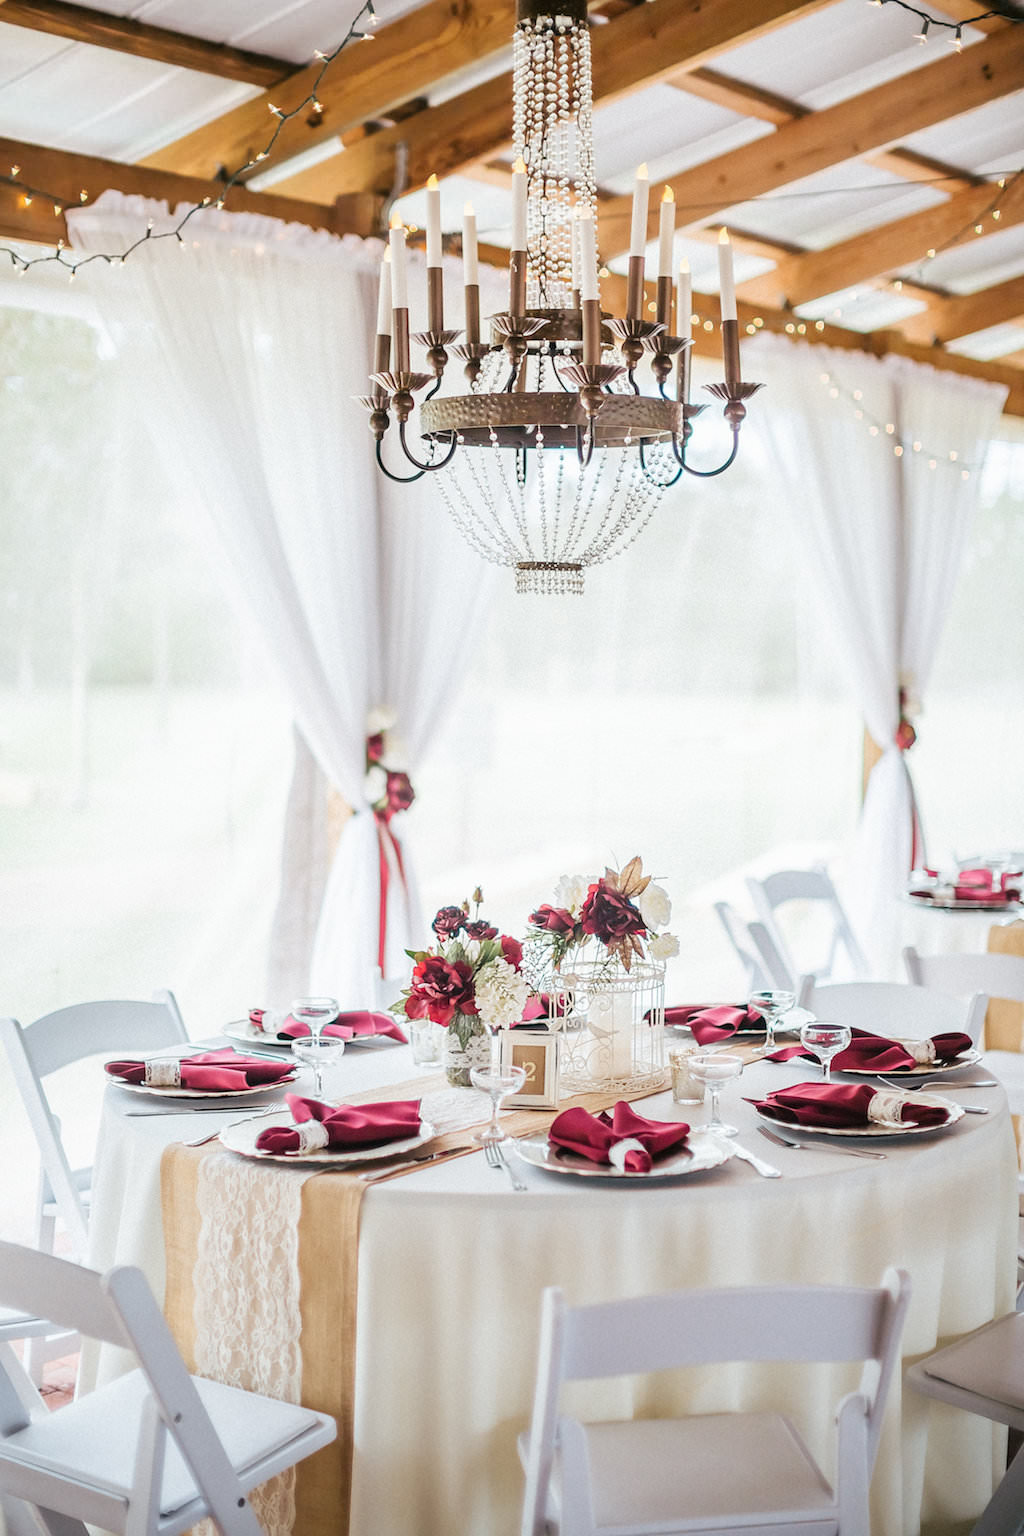 Rustic Barn Wedding Reception with String LIghts, Chandeliers, Burlap and Lace Runners on Cream Linen with Burgundy Napkins and Red Rose Centerpieces in Mason Jars with White Folding Chairs